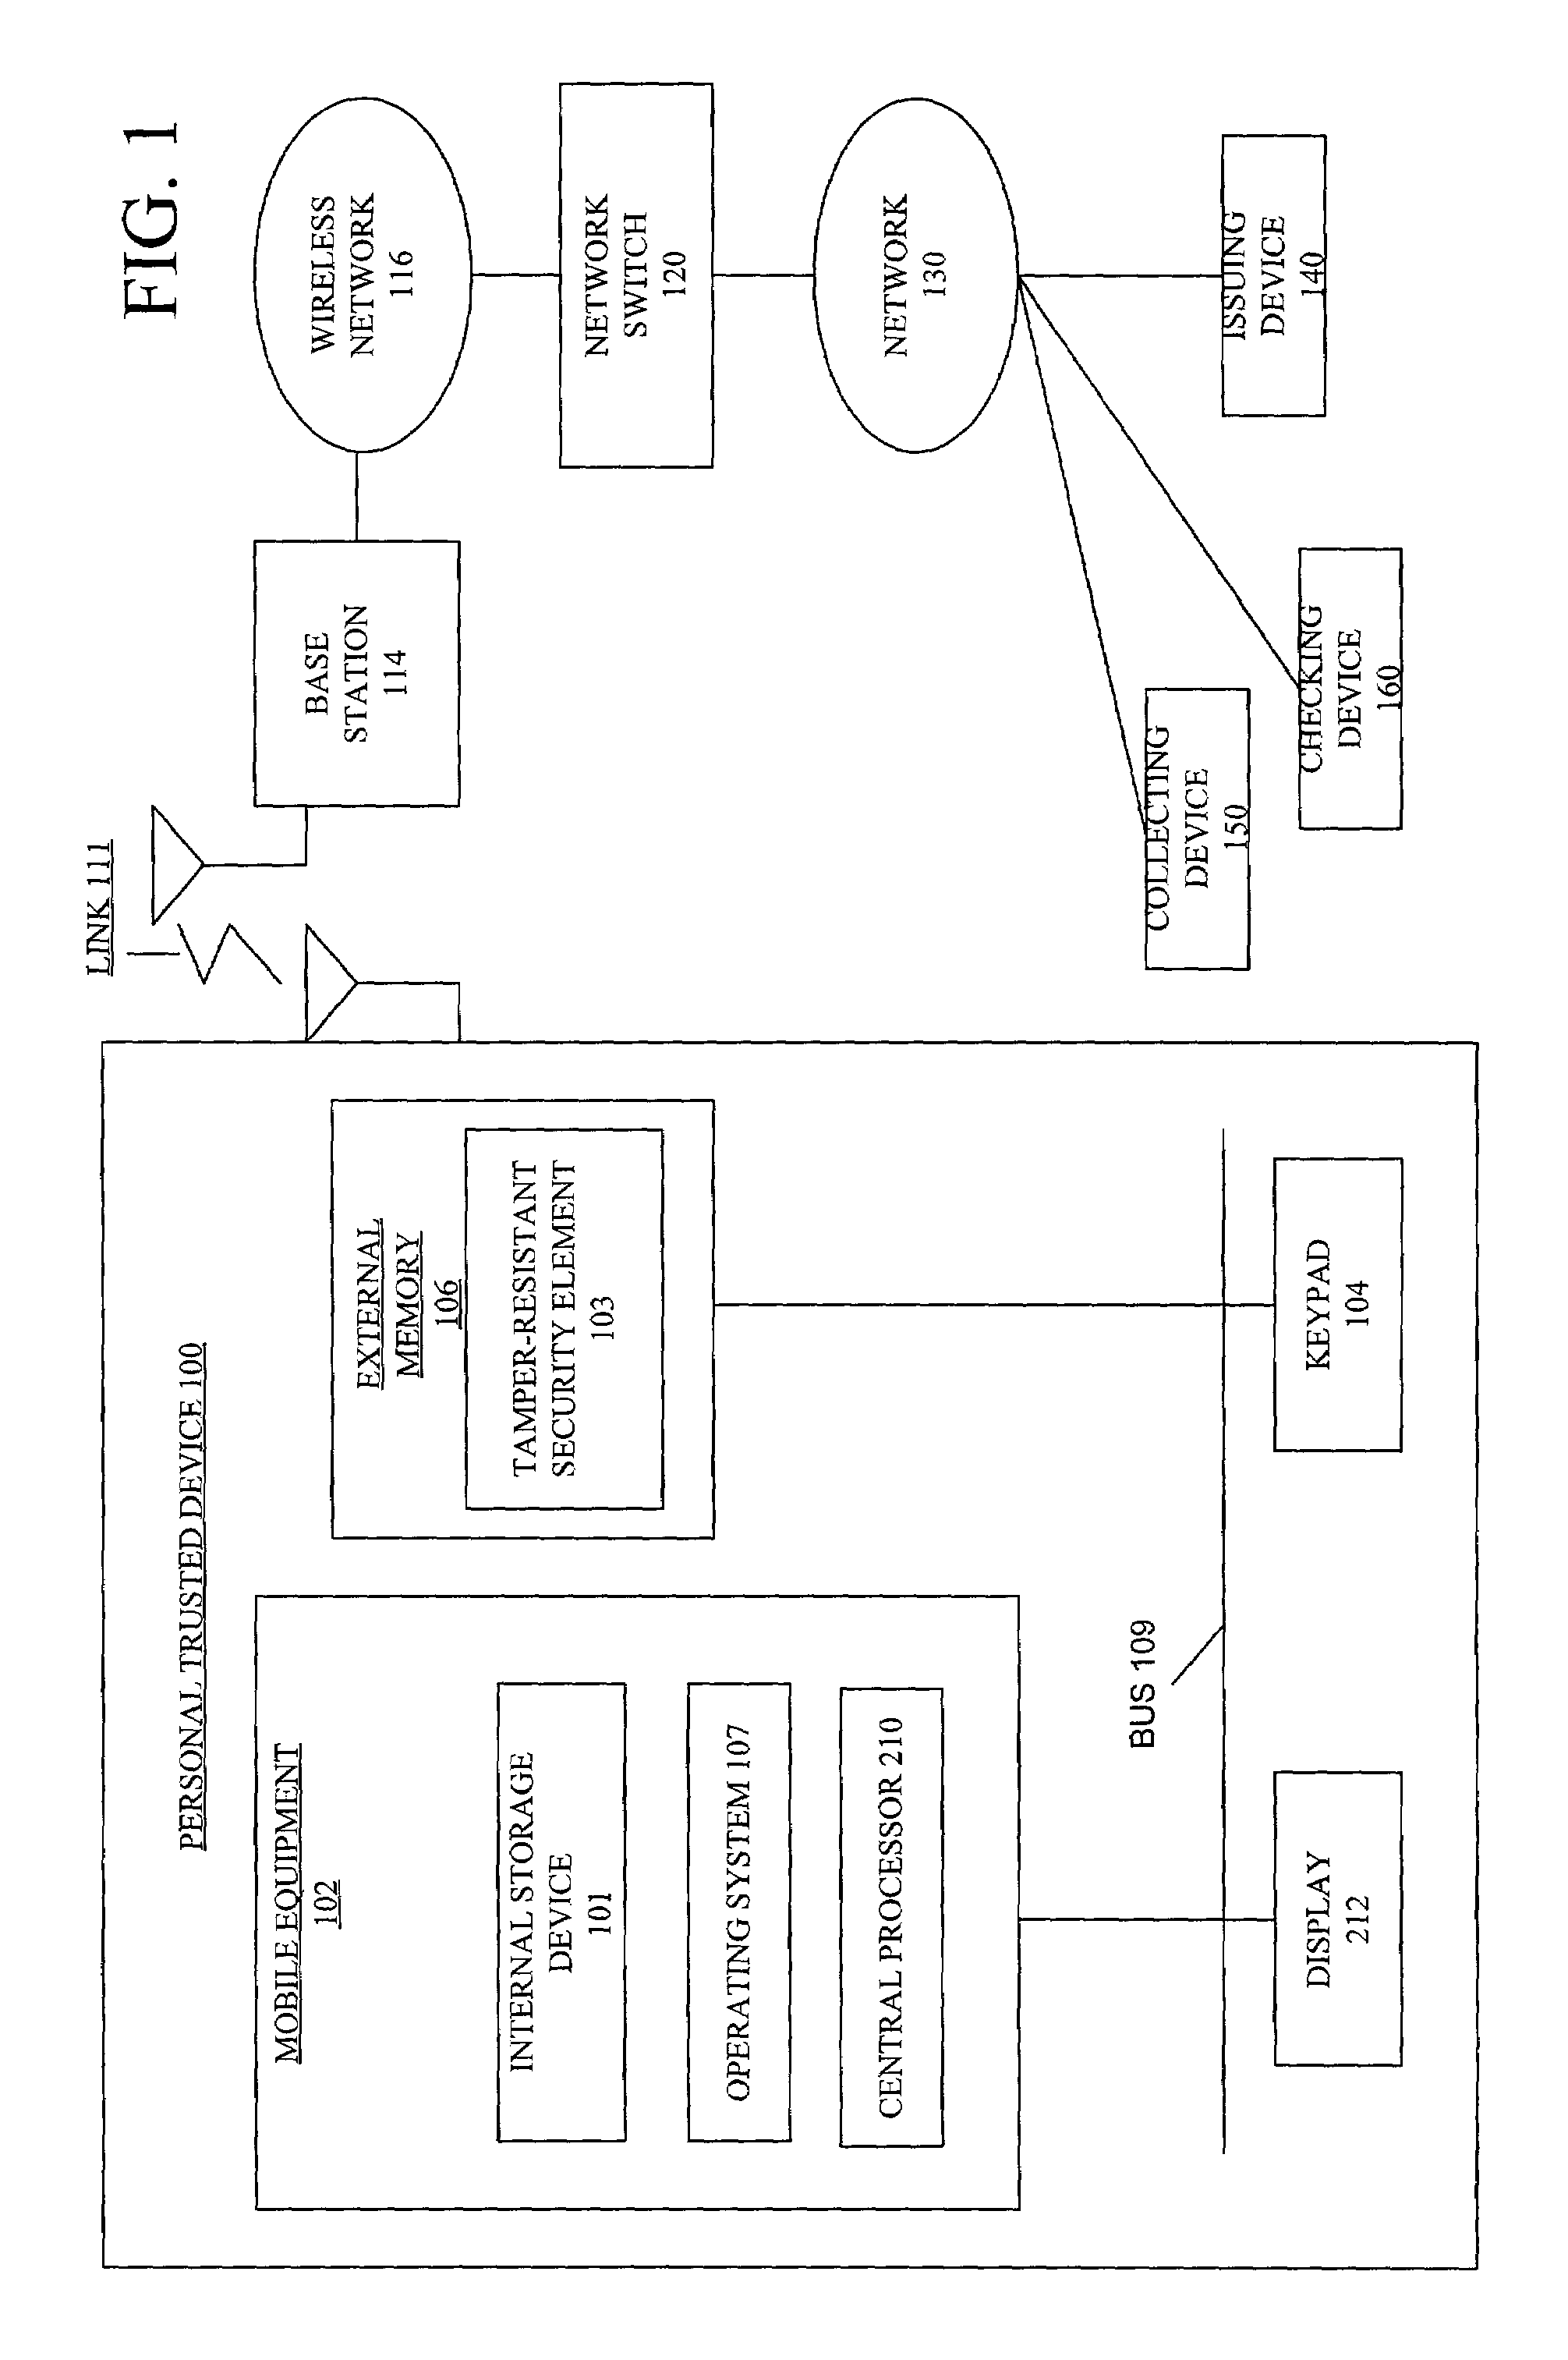 Method, system and computer program product for secure ticketing in a communications device